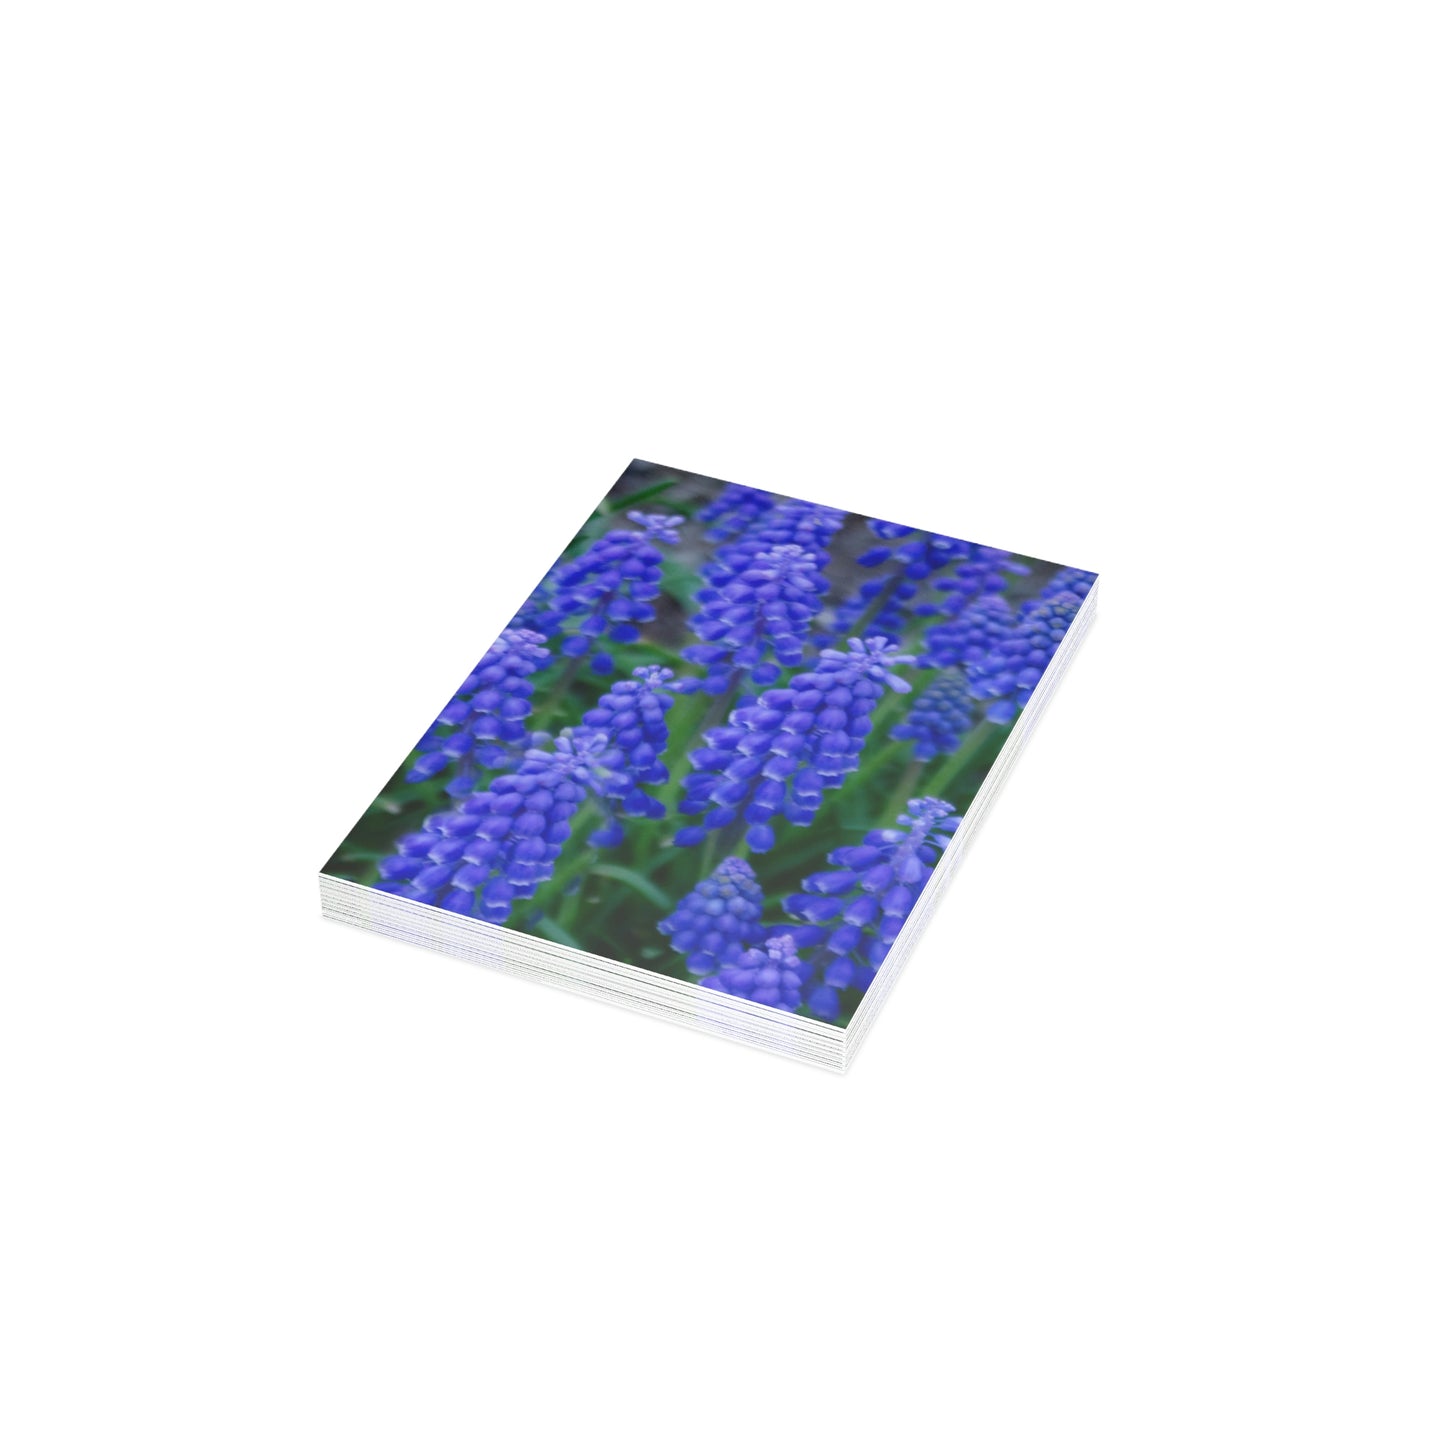 Flowers 10 Greeting Cards (1, 10, 30, and 50pcs)